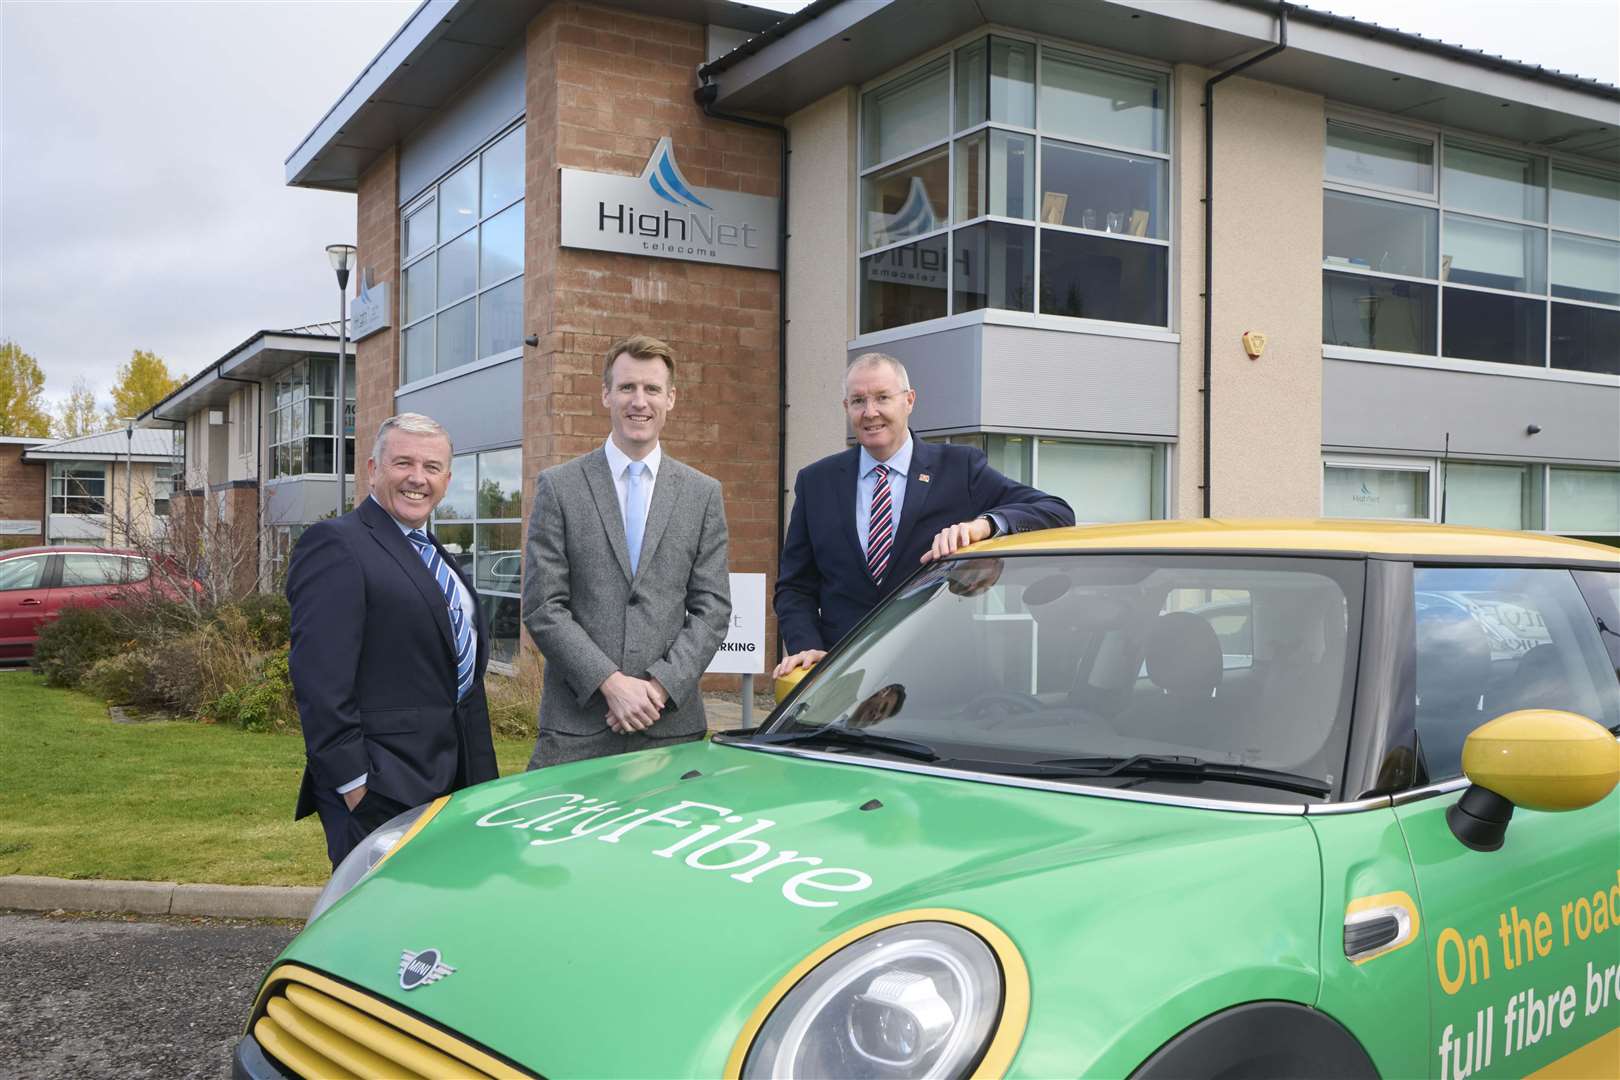 David Siegel, managing director at HighNet, Allan McEwan, CityFibre’s city manager for Inverness, and Councillor Duncan MacPherson outside HighNet's head office at Cradlehall Business Park.